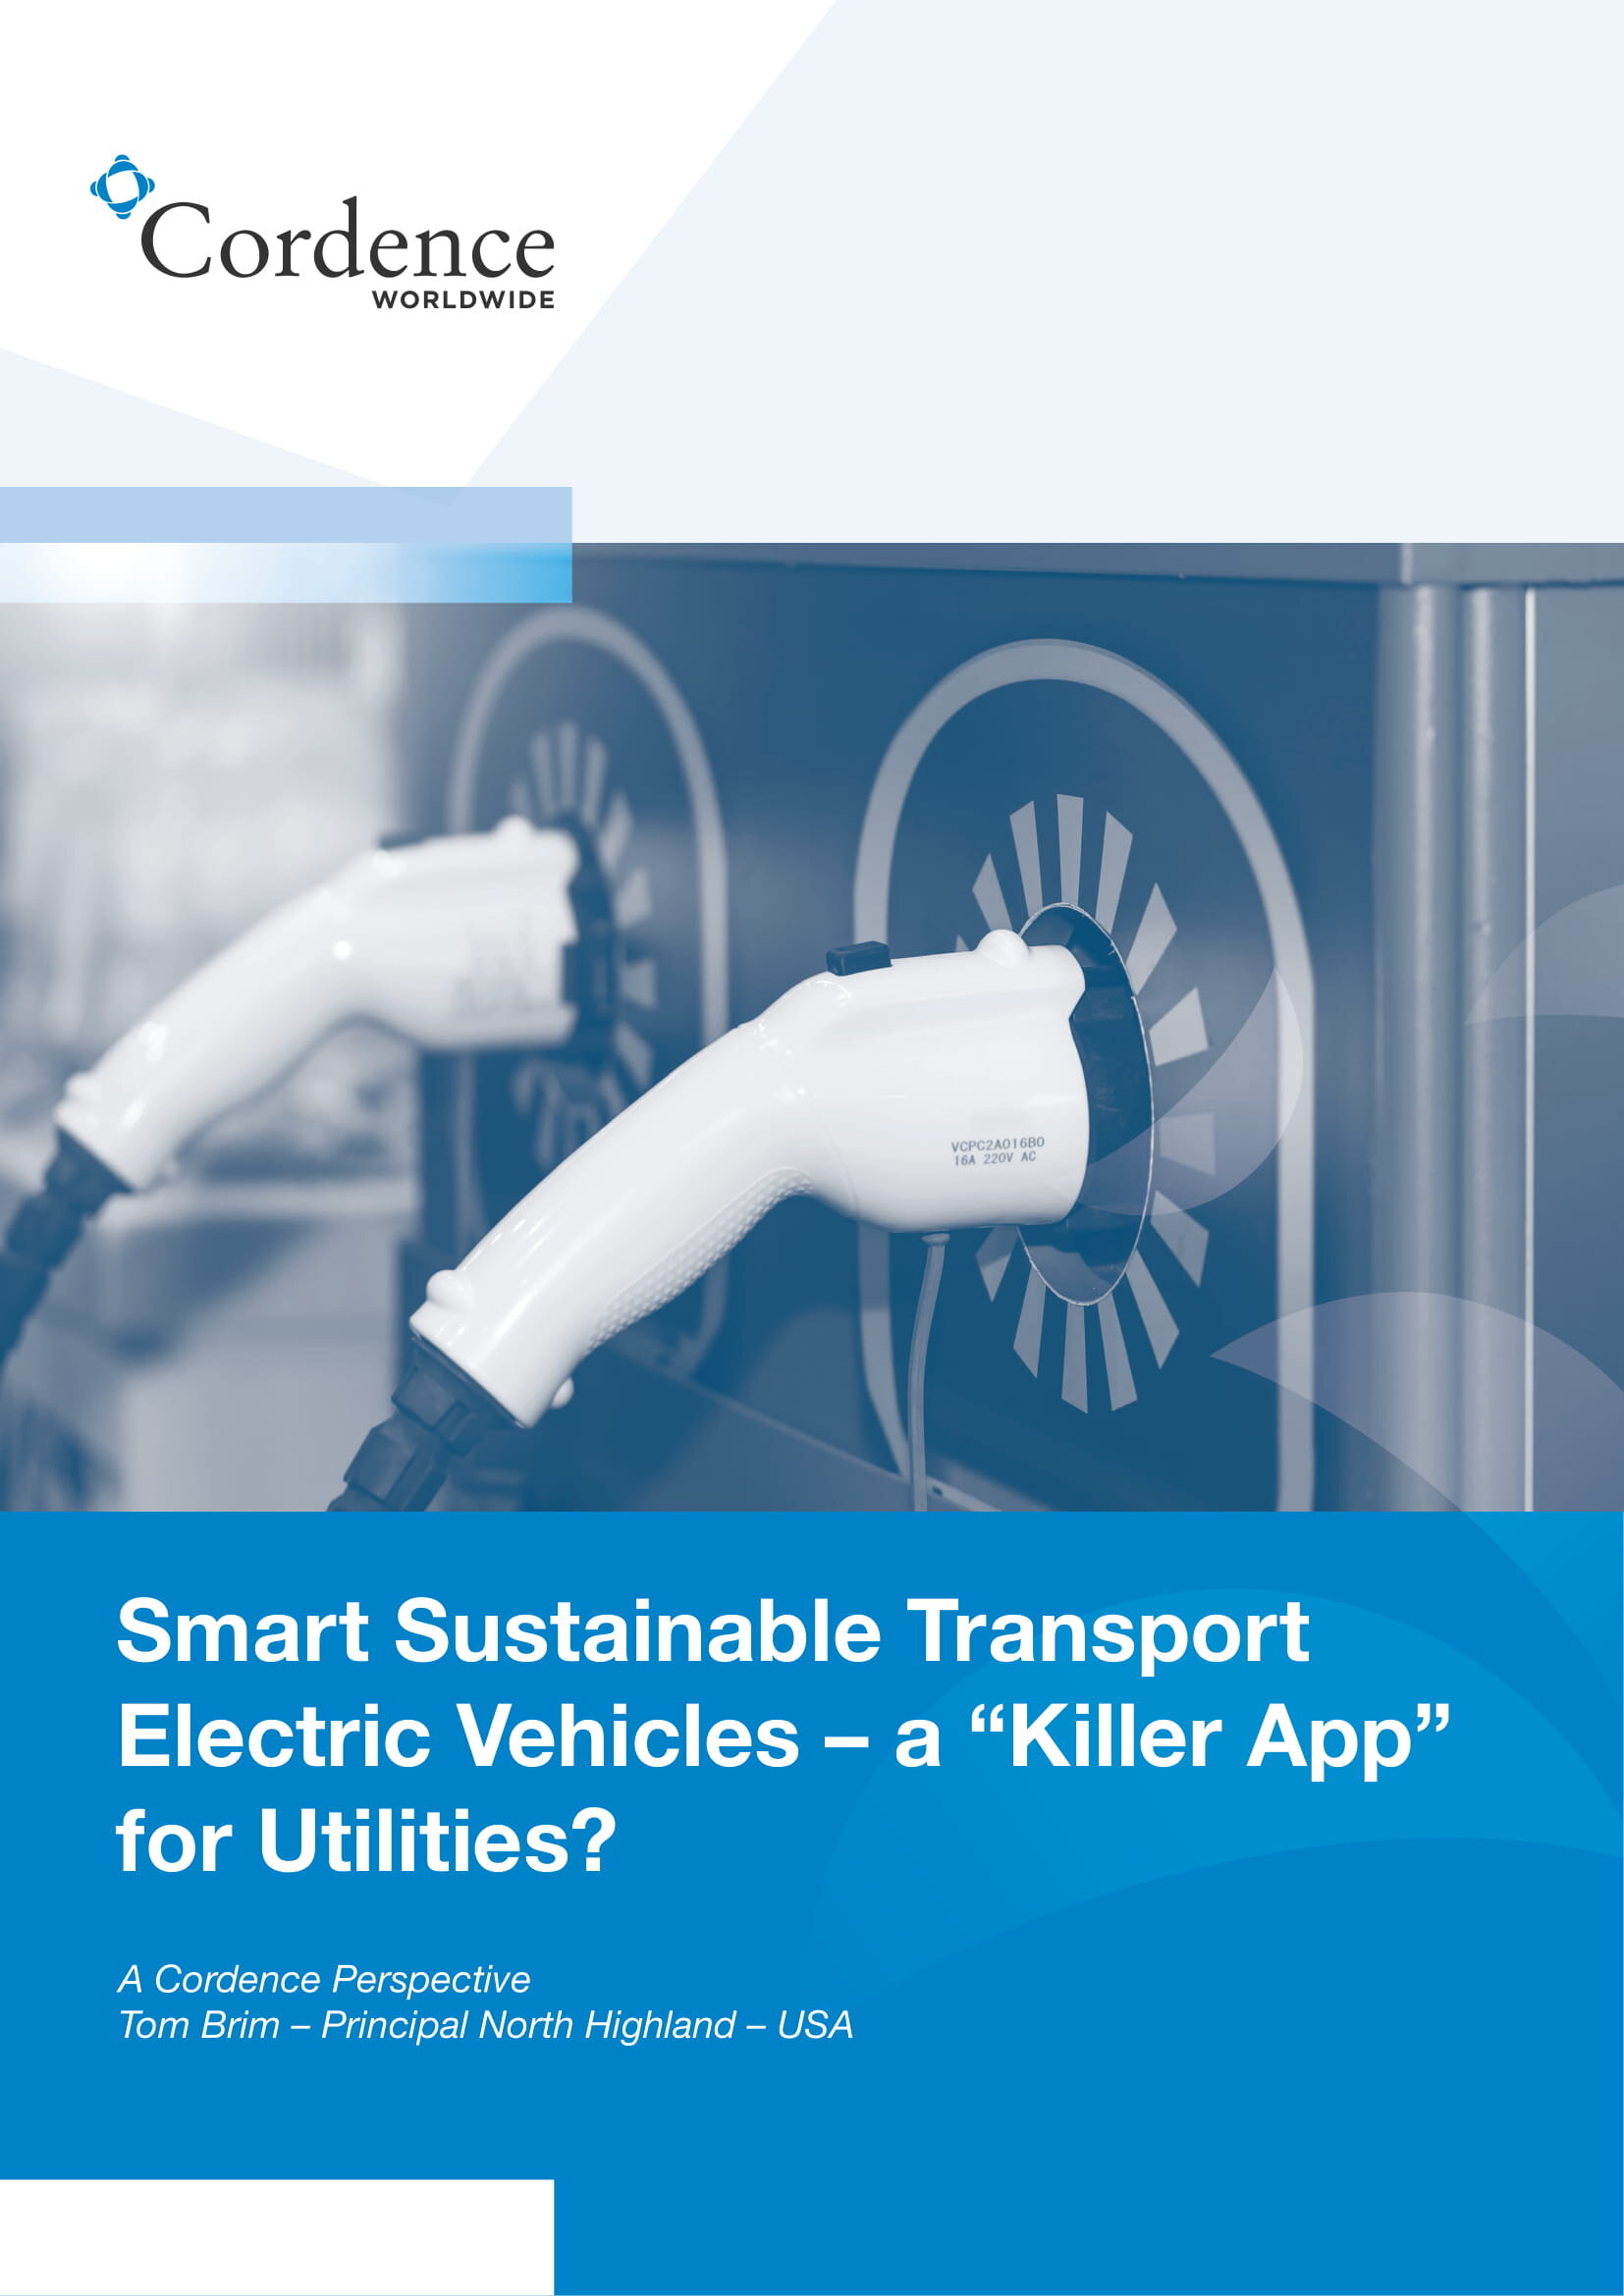 Electric Vehicles - a Killer App for Utilities-01.jpg